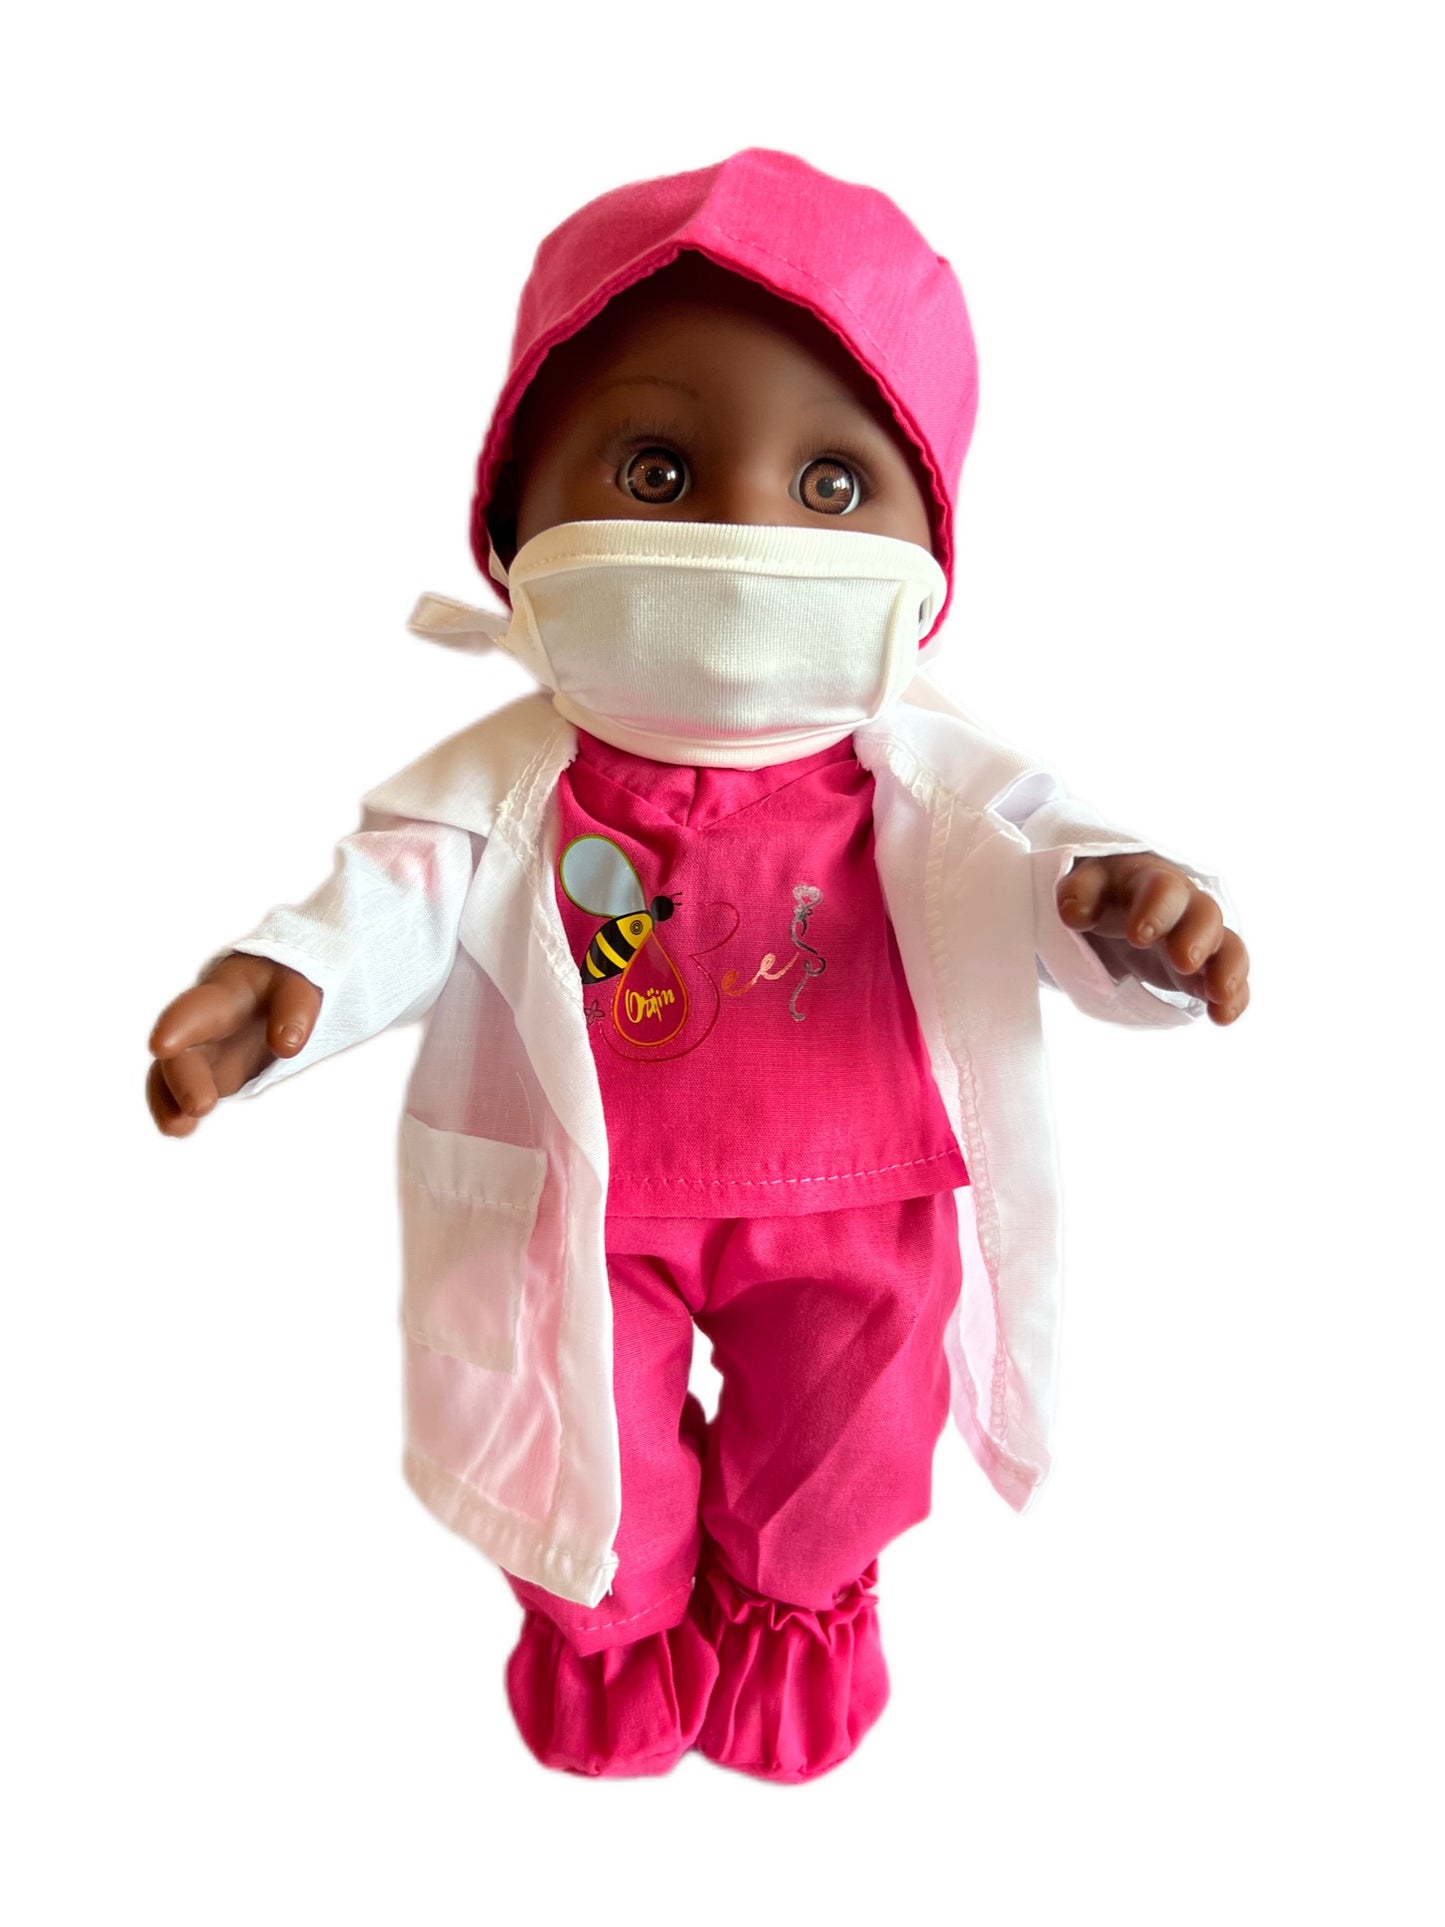 8 Piece Healthcare Hero Outfit (doll sold separately)